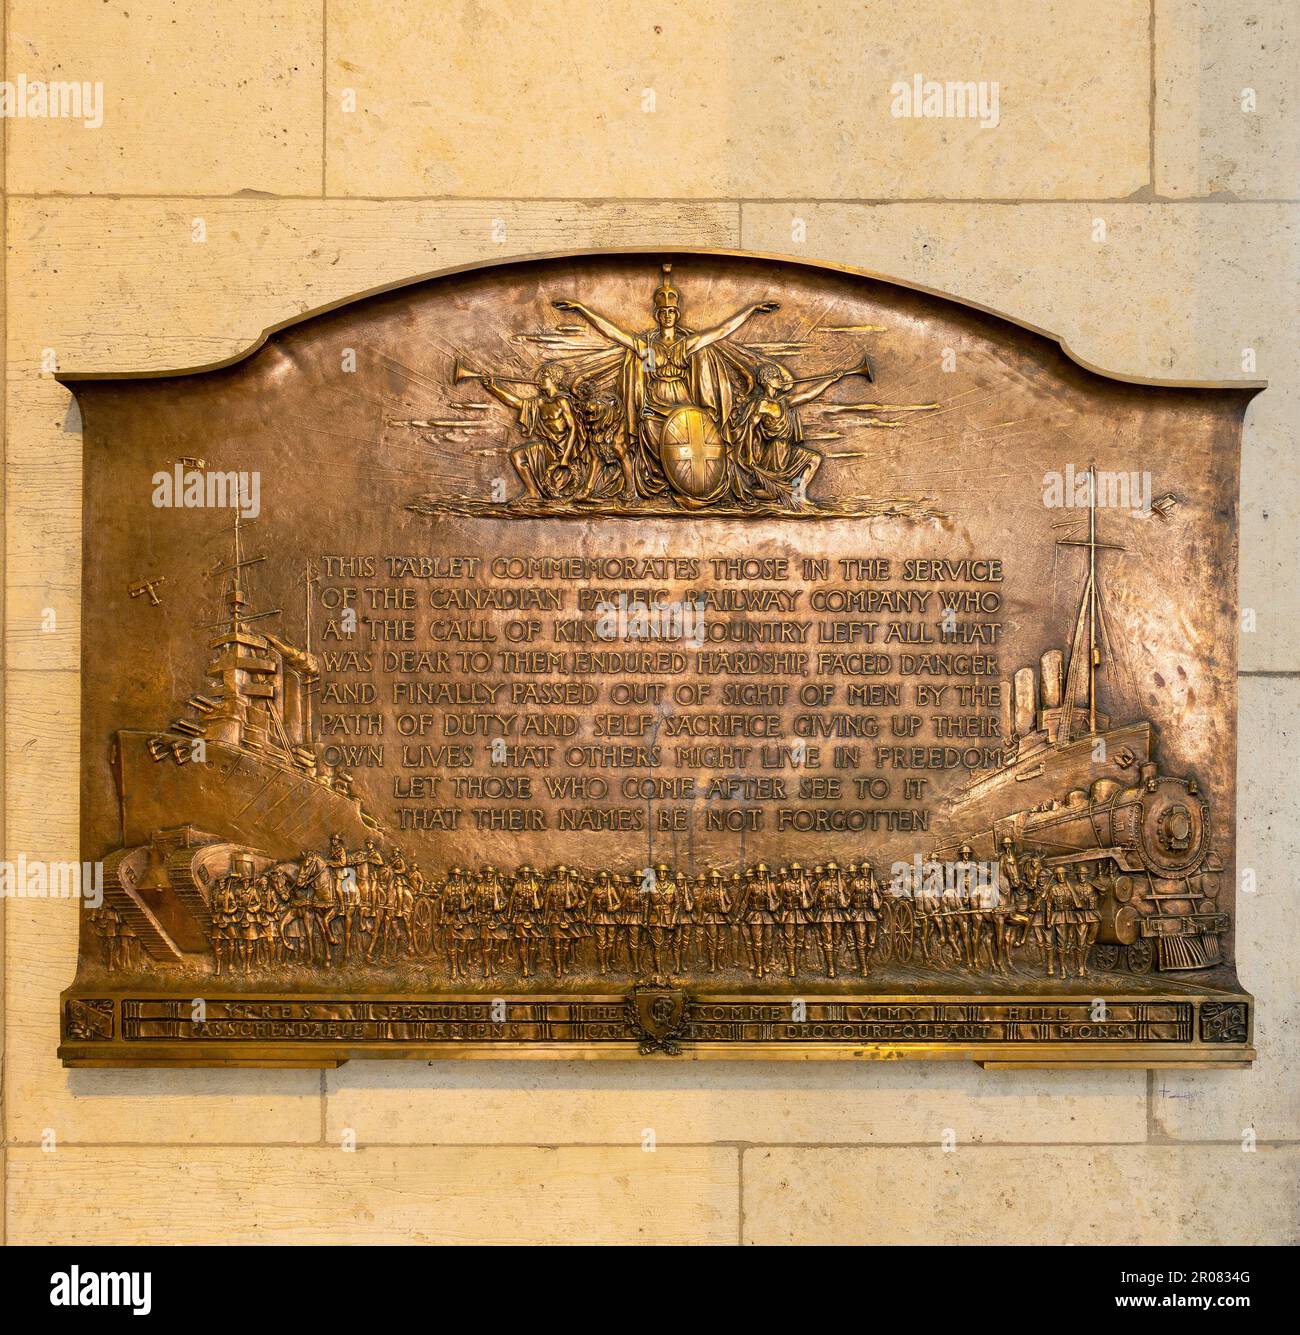 Canadian Pacific Railway Workers Memorial Plaque Inside Union Station Toronto Commemorating Employees Lost In World War 1 Stock Photo